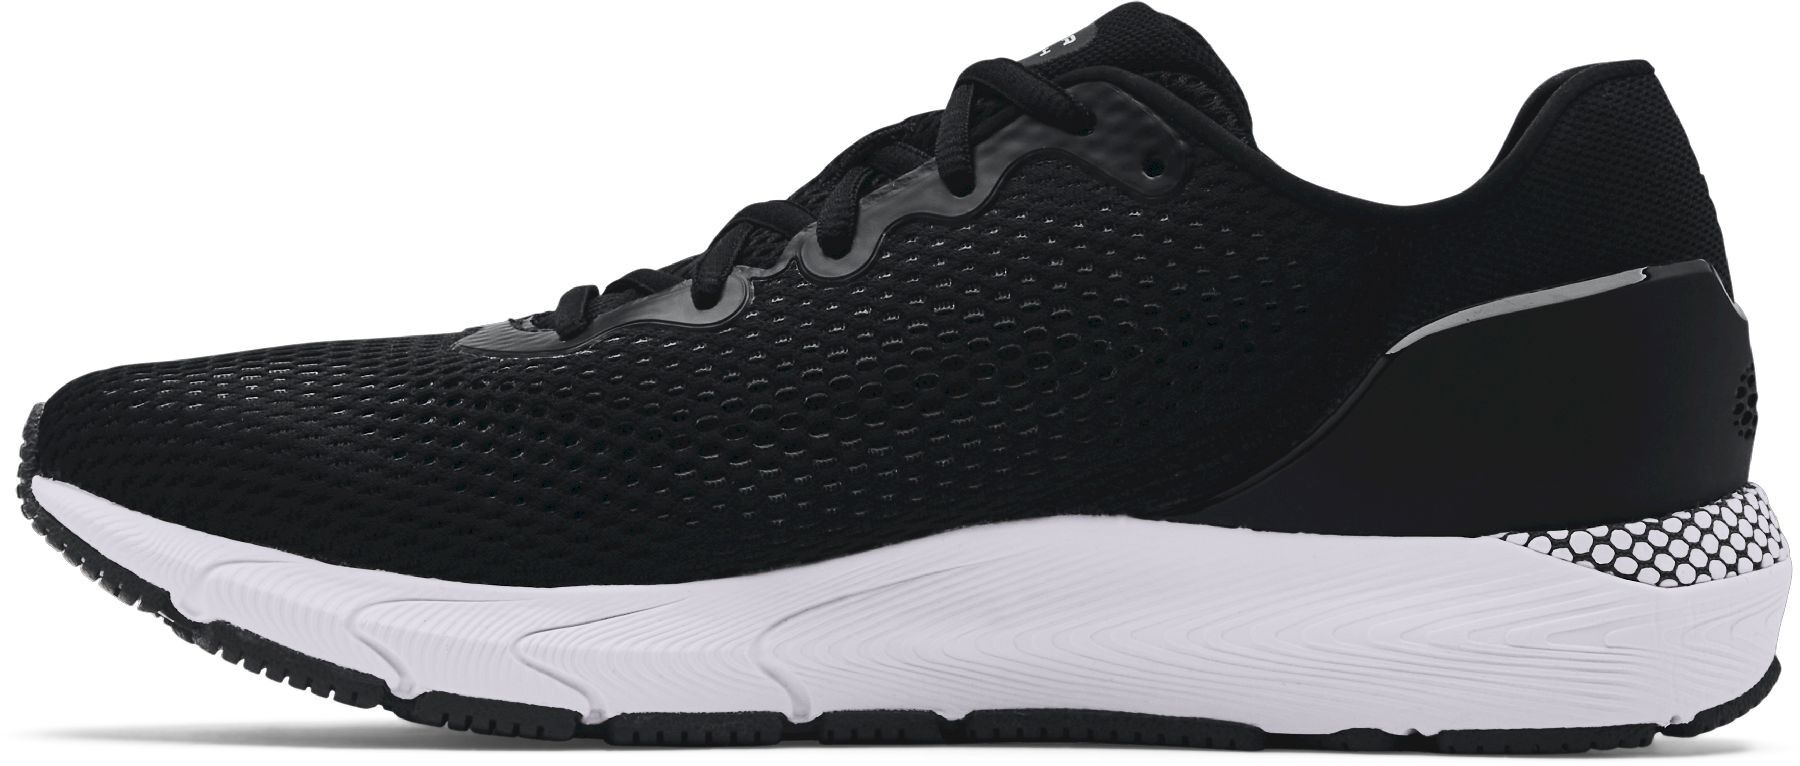 Under Armour UA HOVR Sonic 4 - Running shoes - Men's